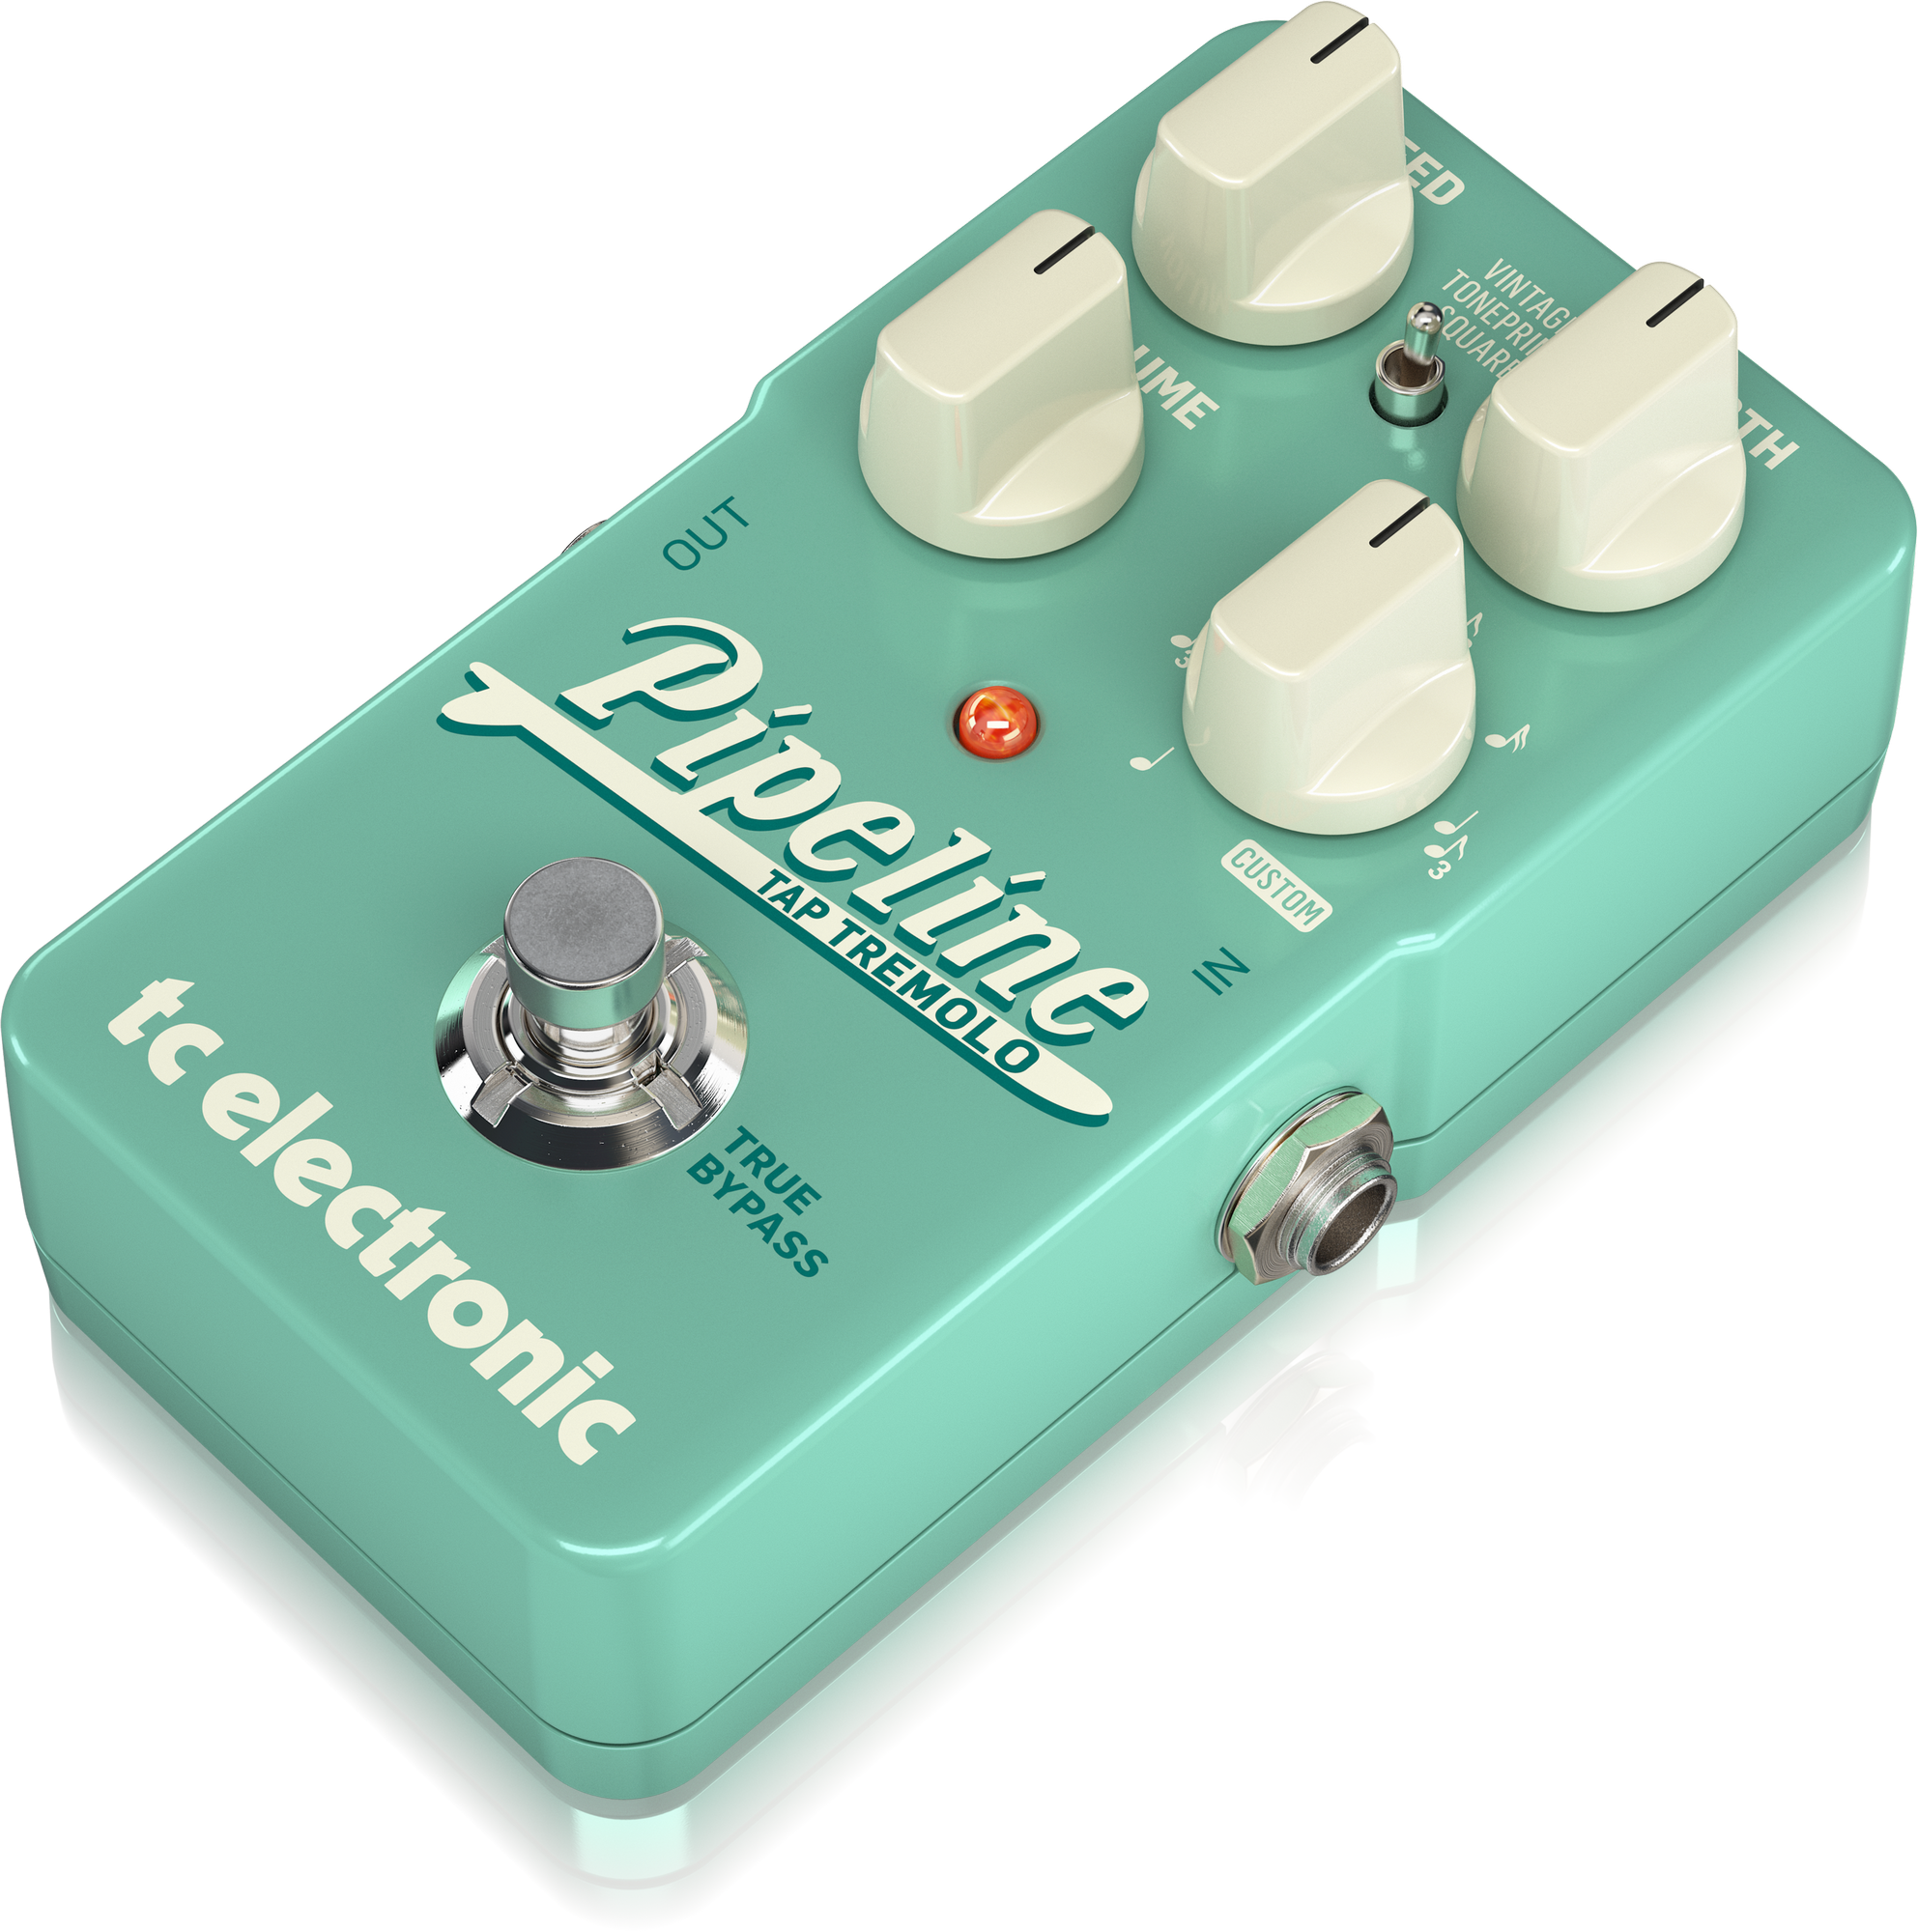 TC Electronic Pipeline Tap Tremolo Ingenious Tap Tempo Tremolo With Sequencer, Subdivisions And Toneprints* For Both Vintage And Adventurous Tremolo Sounds, TC ELECTRONIC, EFFECTS, tc-electronic-effects-tc-pipeline-tap-tremolo, ZOSO MUSIC SDN BHD